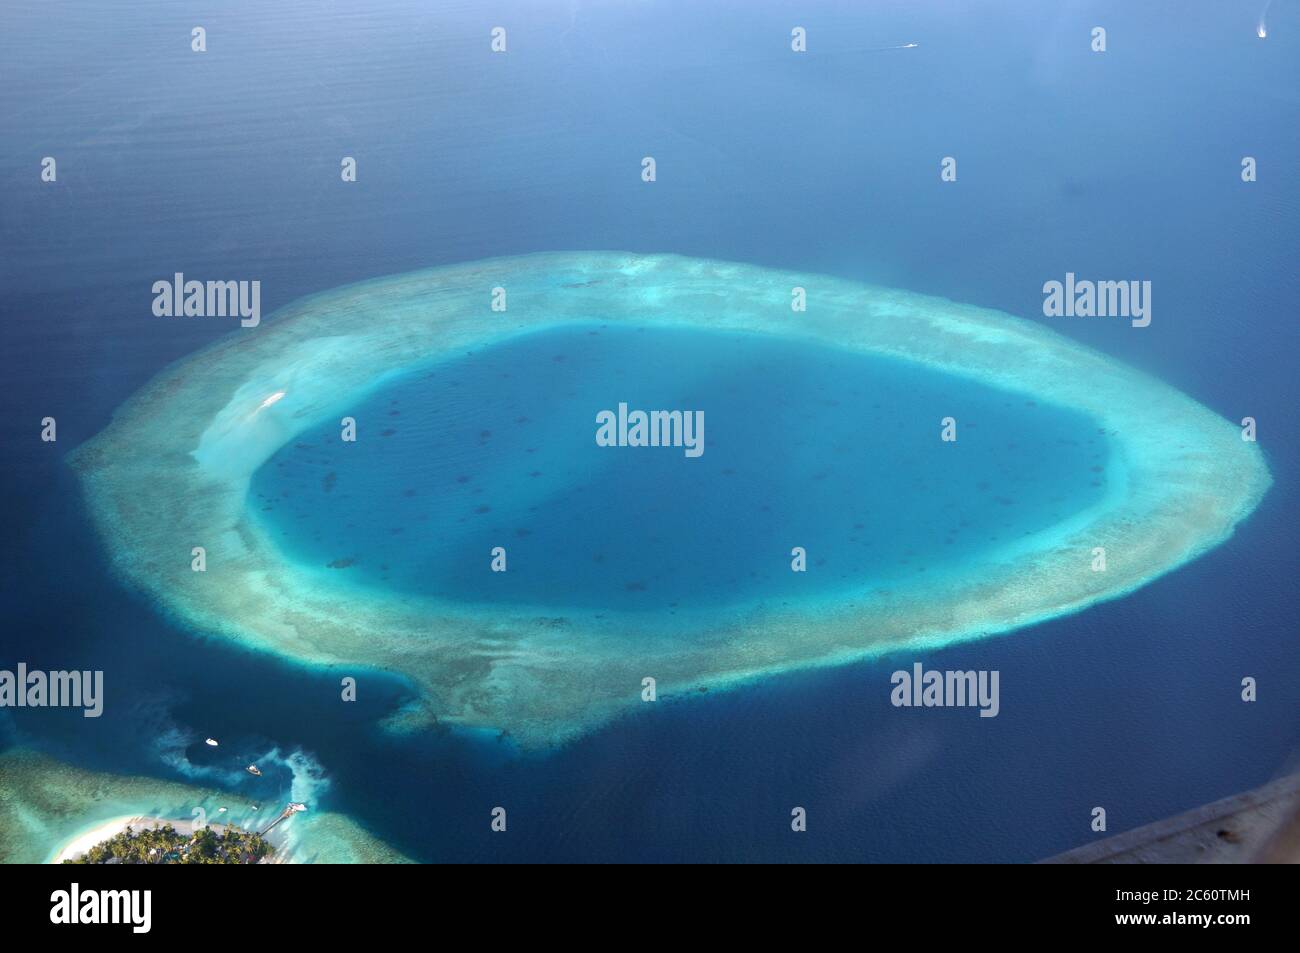 Atoll Island seen from above as a blue eye Stock Photo